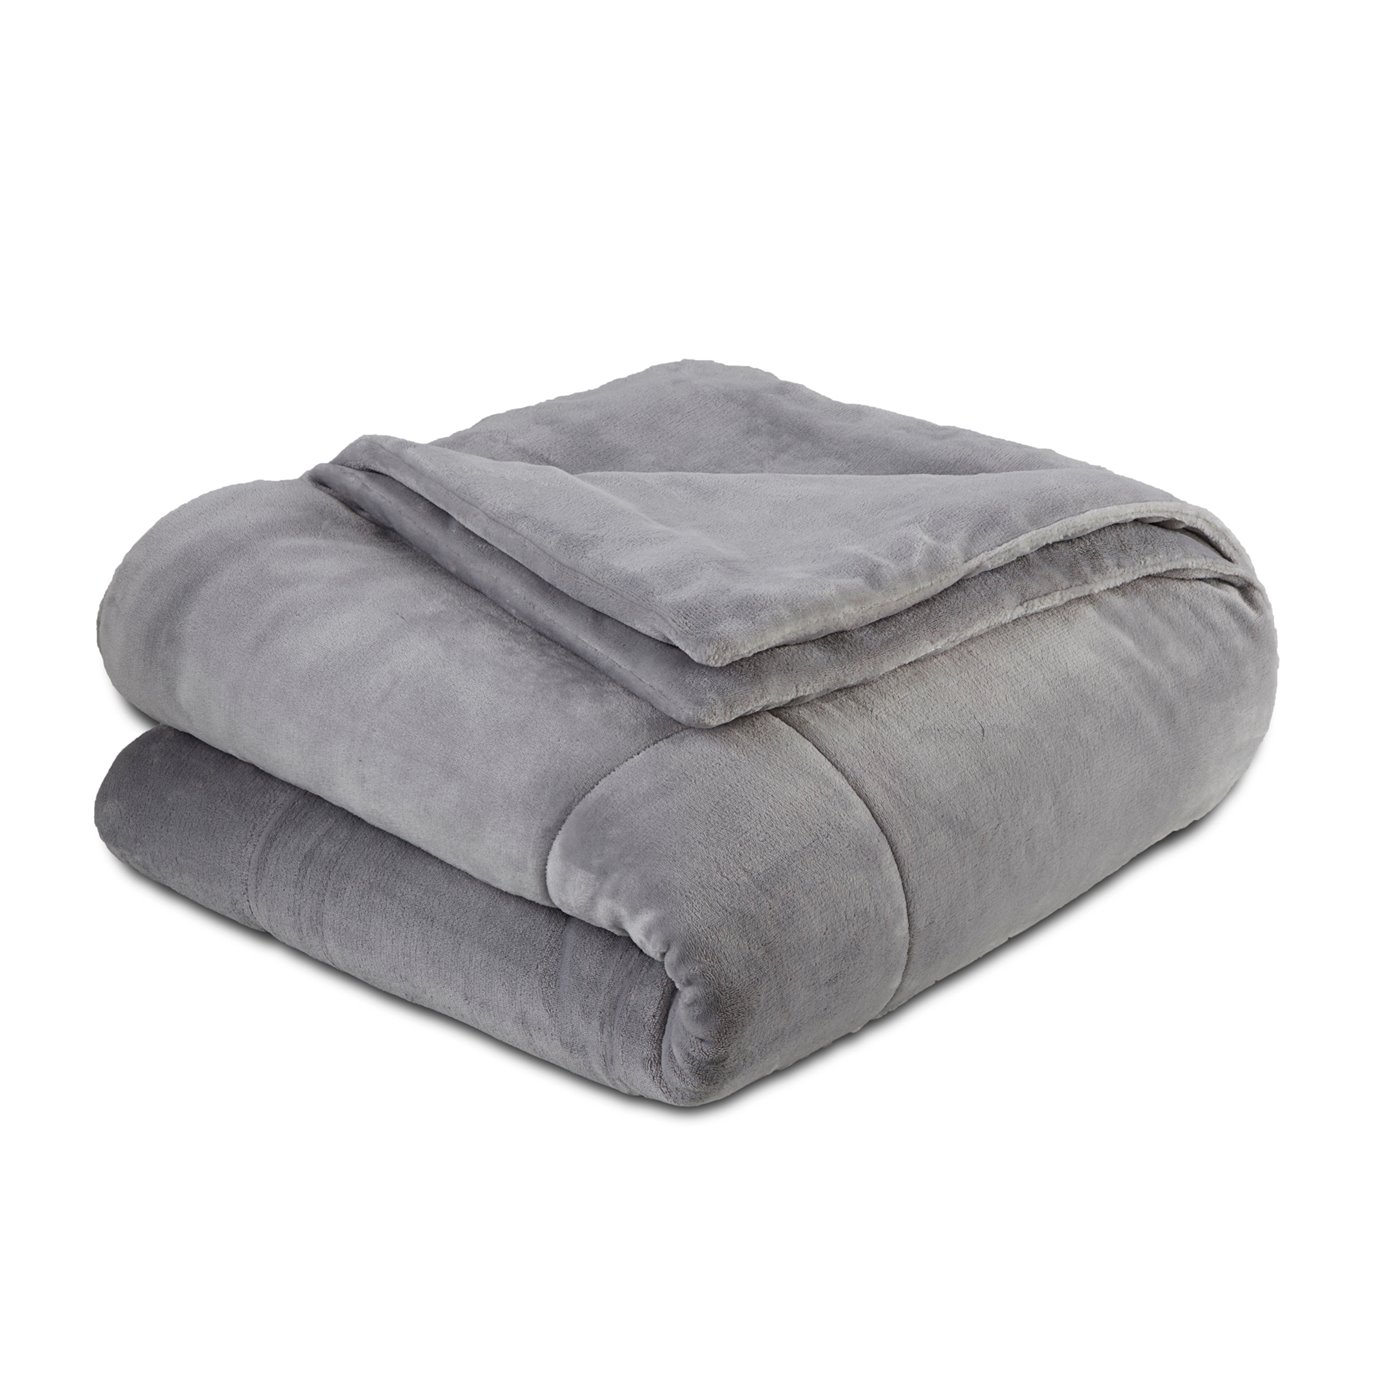 Vellux PlushLux Filled King Gray Blanket